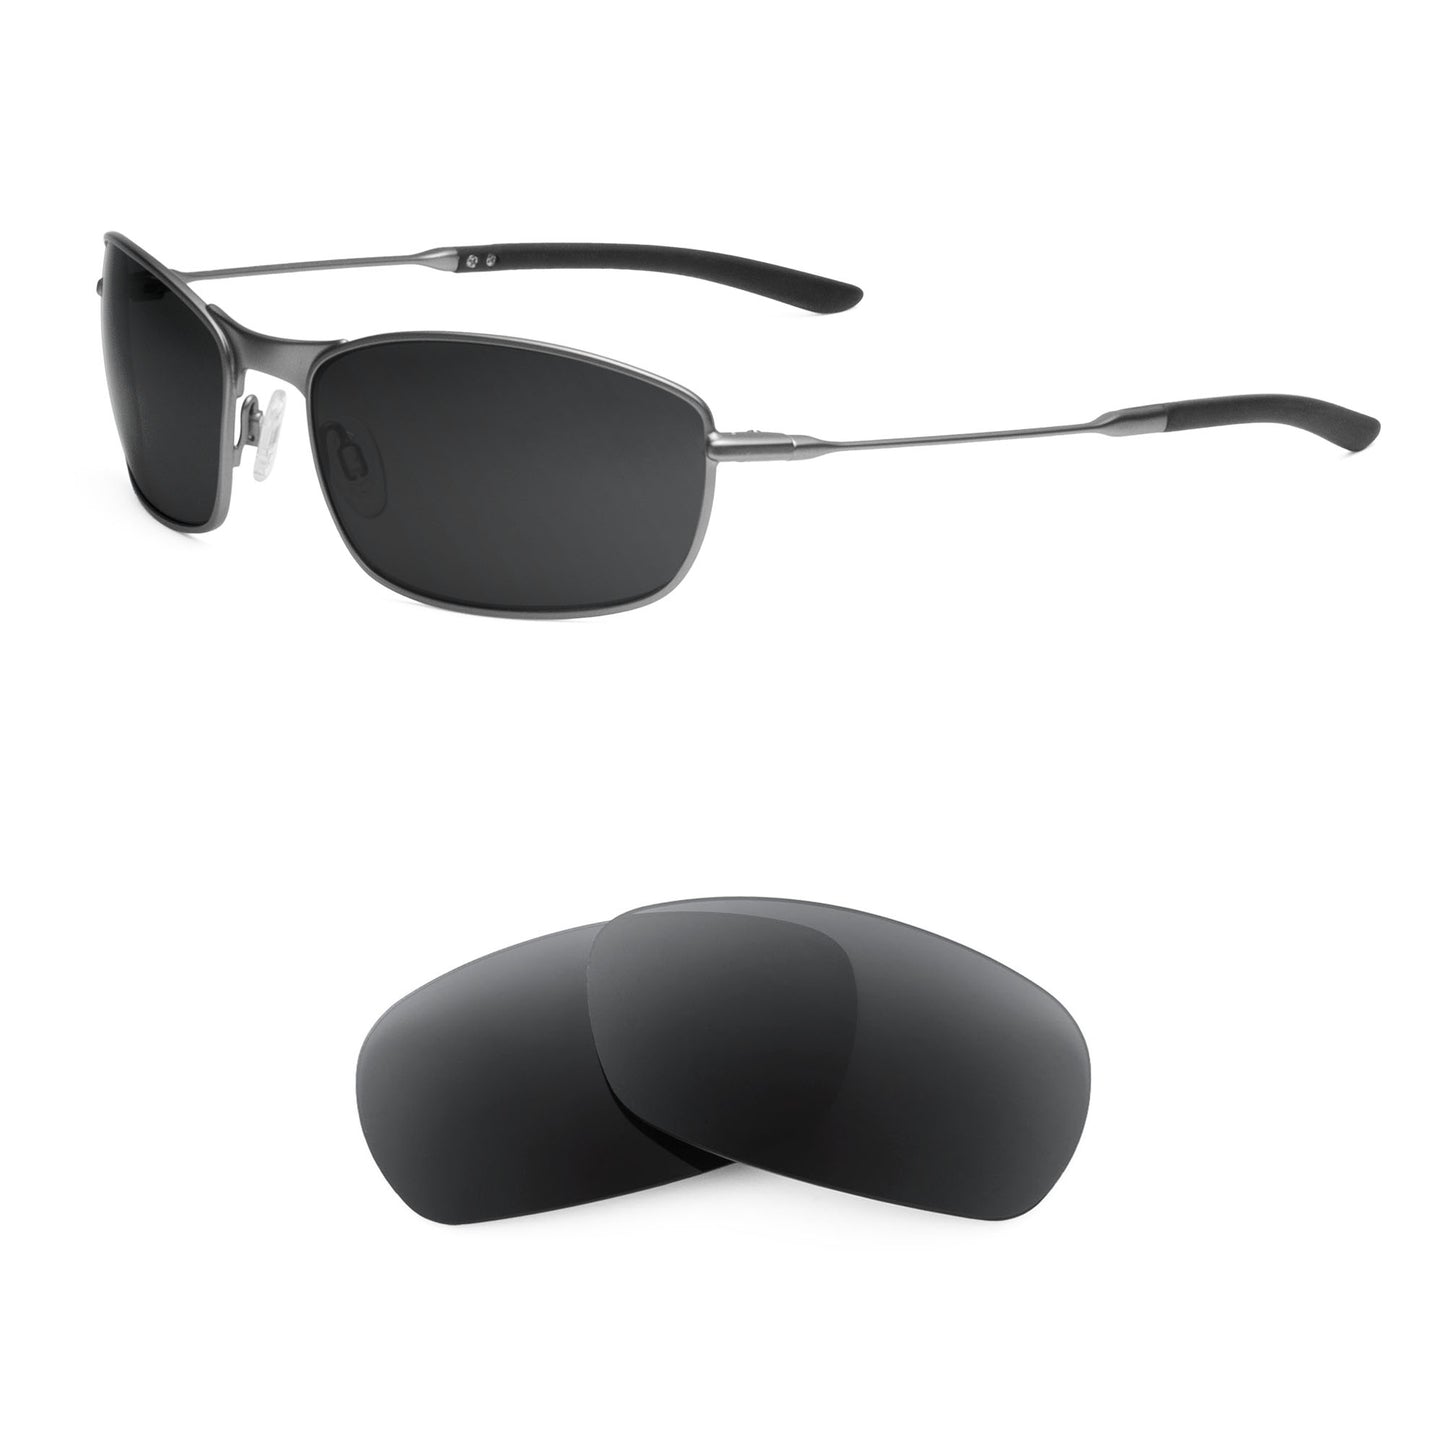 Revo Thin Shot RE3090 sunglasses with replacement lenses